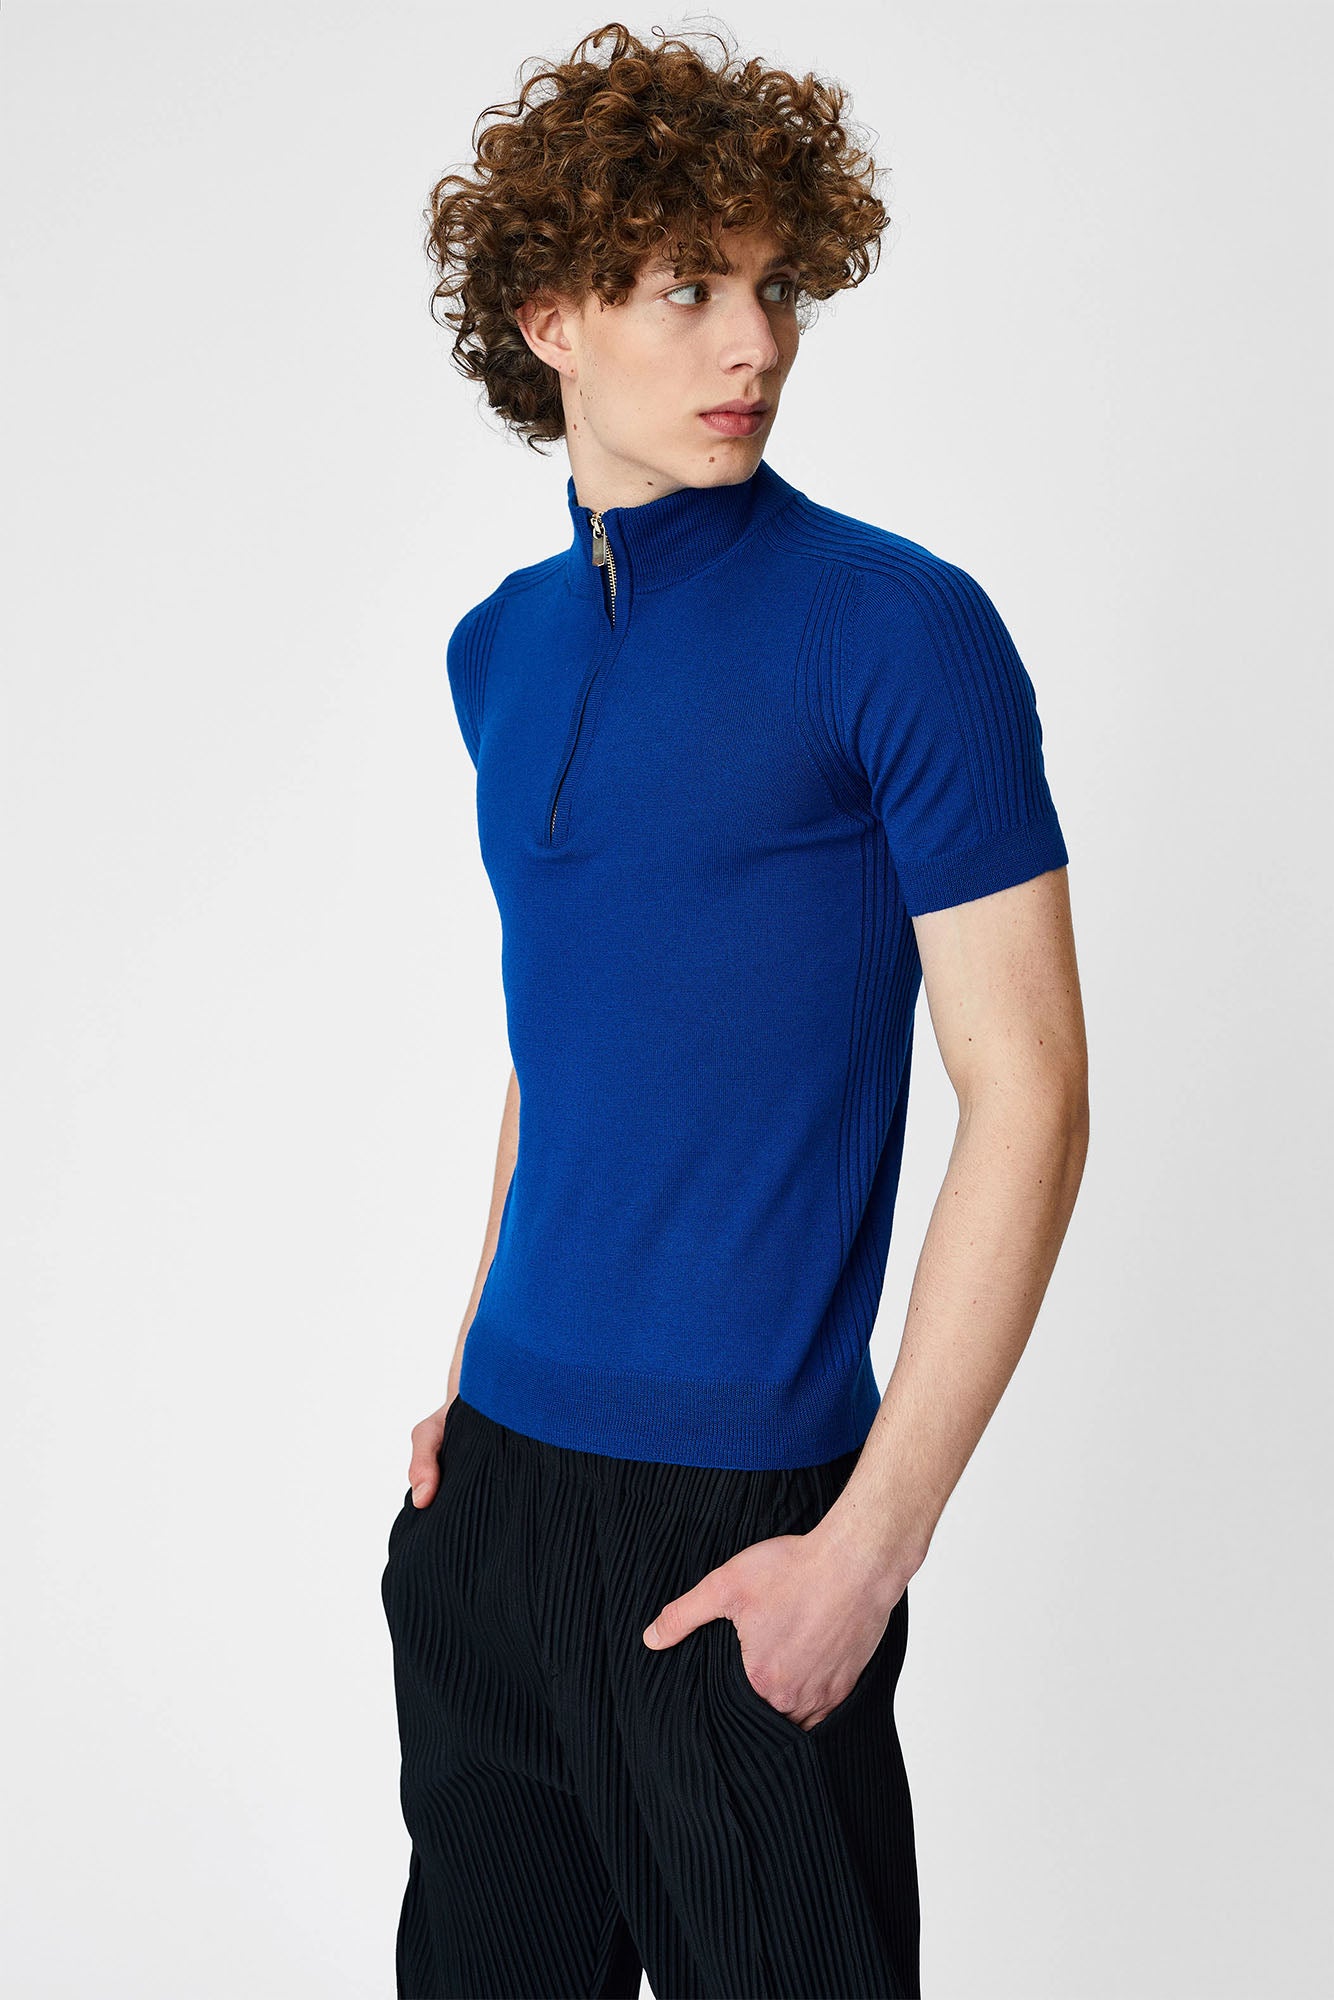 Short sleeve sweater with collar and zipper for men